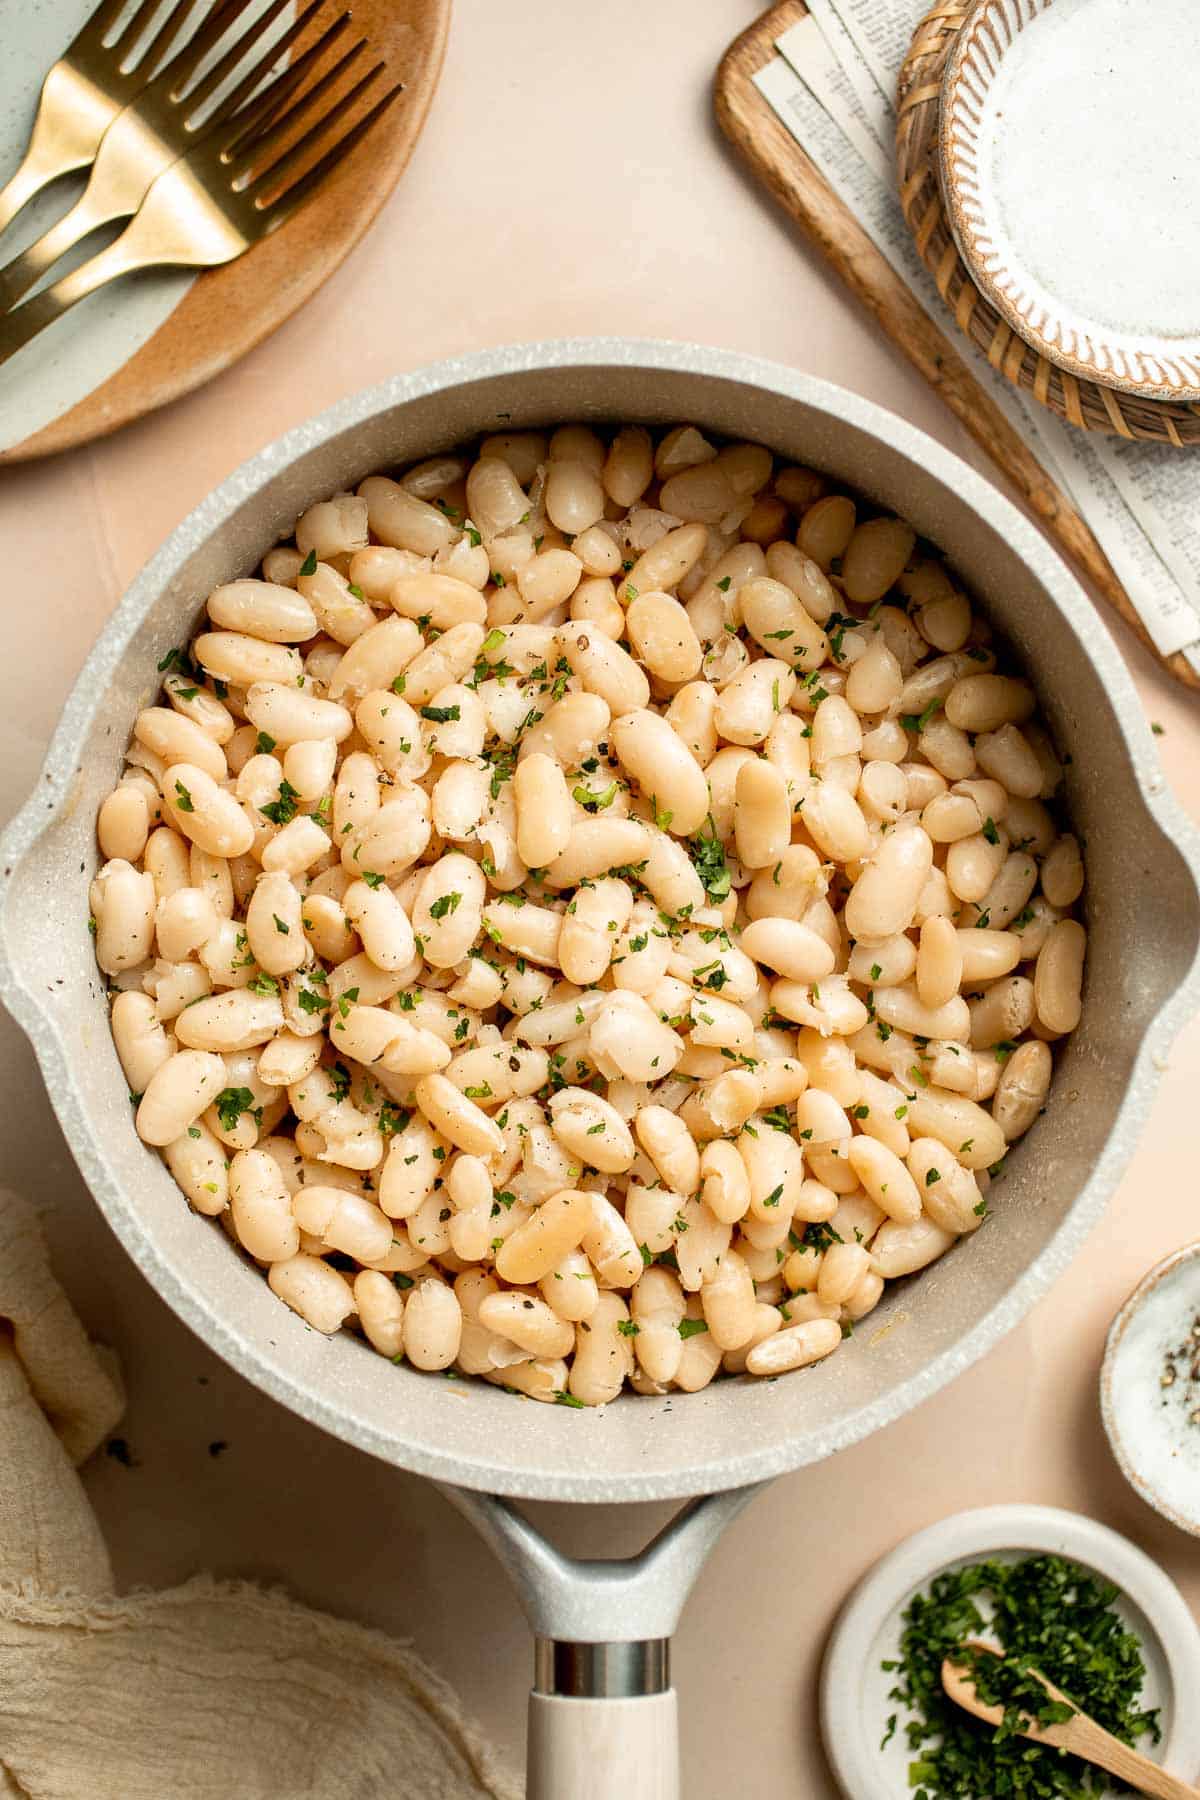 One pot Cannellini Beans are creamy, buttery, and nourishing. Serve them as a simple vegan side dish or as a delicious addition to soups, salads, and more. | aheadofthyme.com